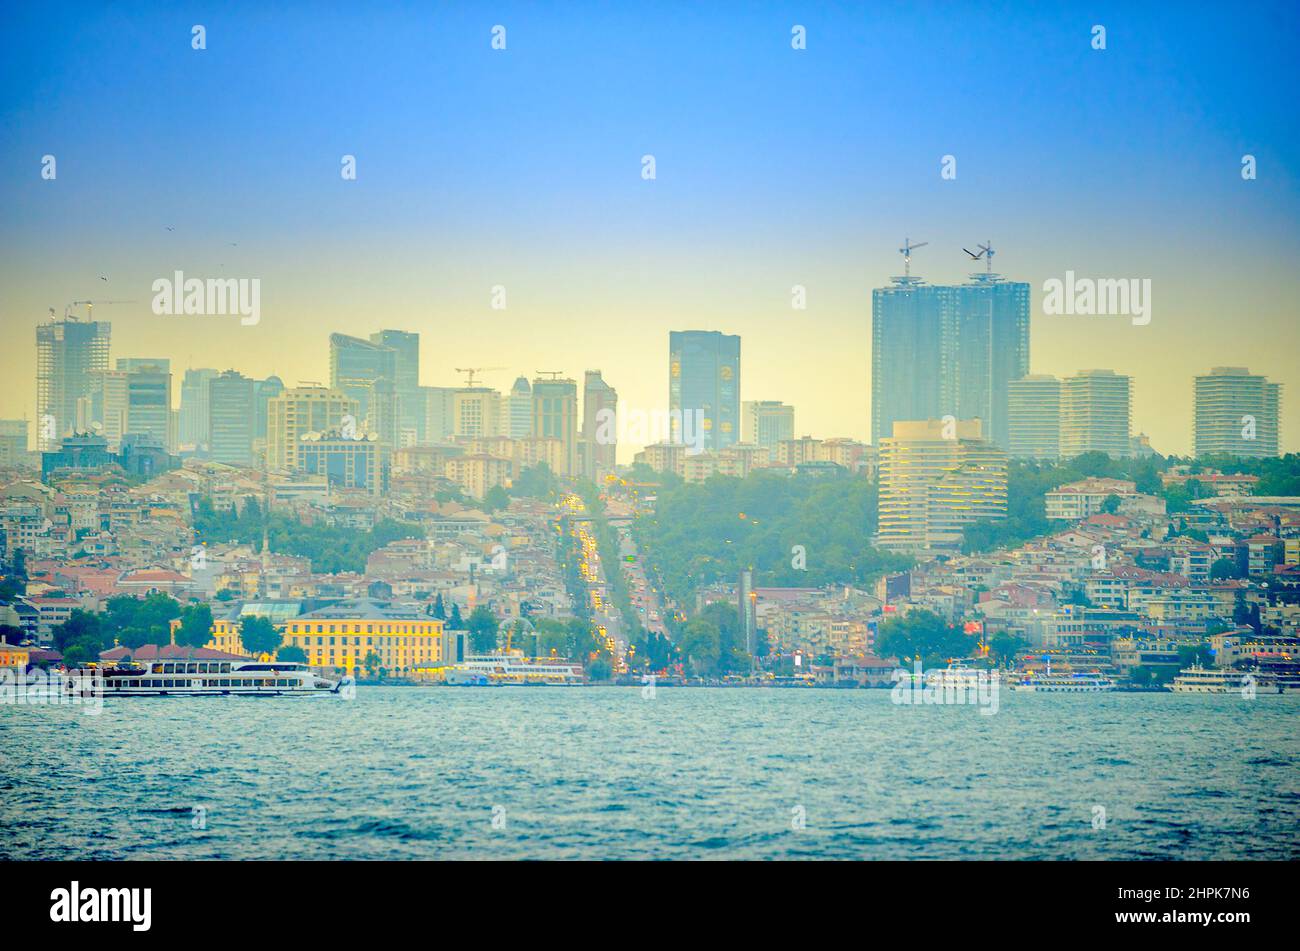 view of the modern part of the city of Istanbul from the strait of the bosphorus, at sunset Stock Photo